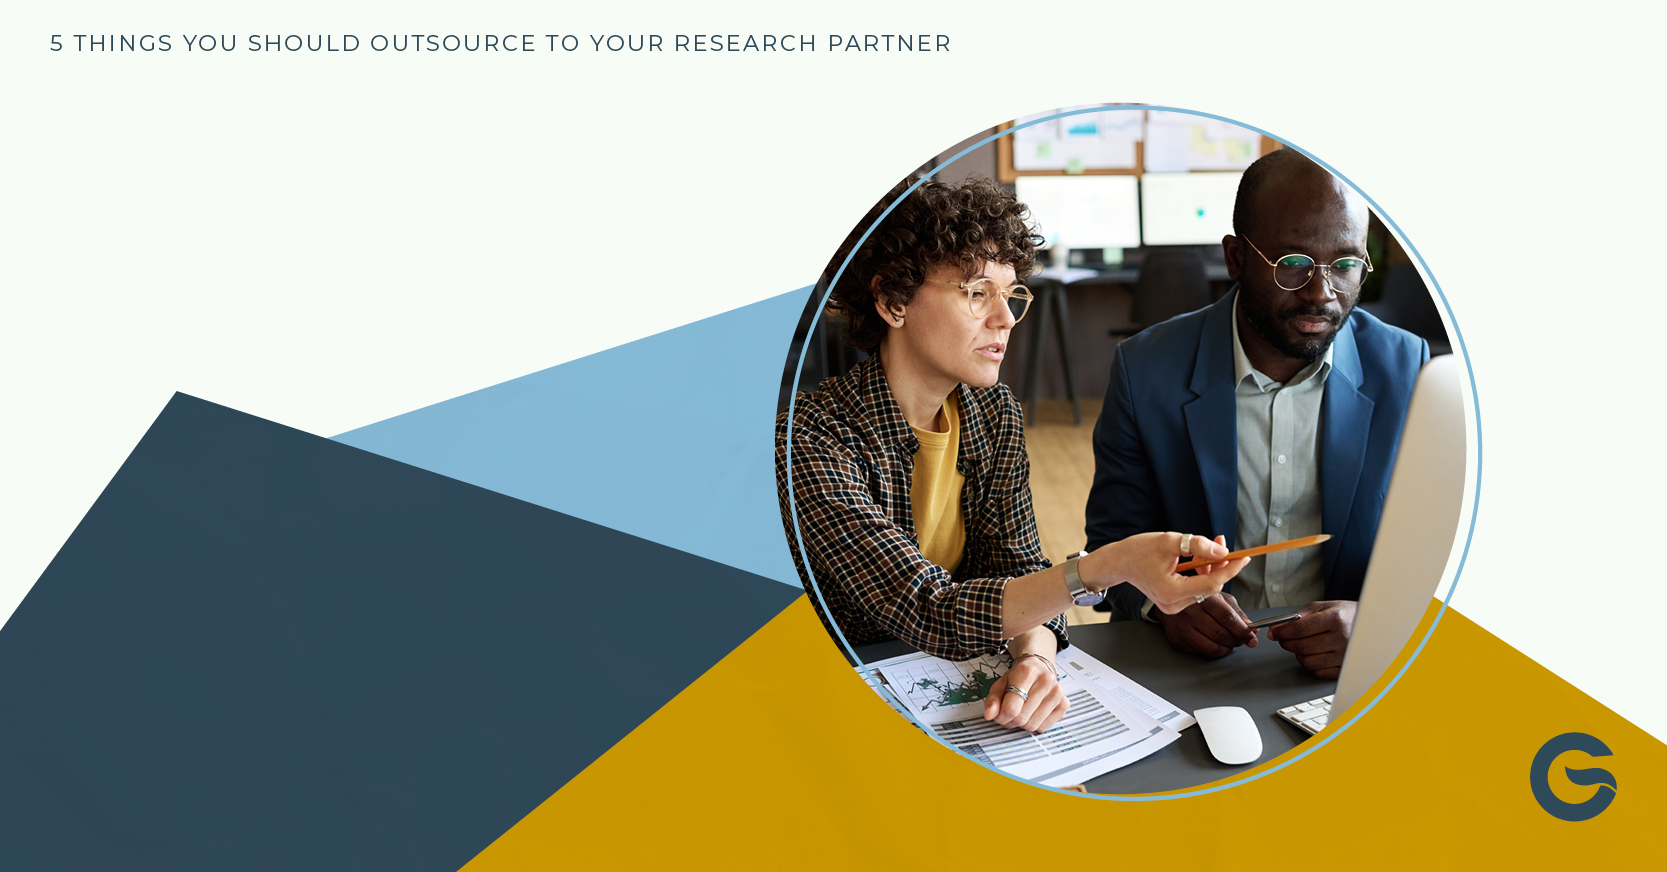 5 Things You Should Outsource to Your Research Partner Image